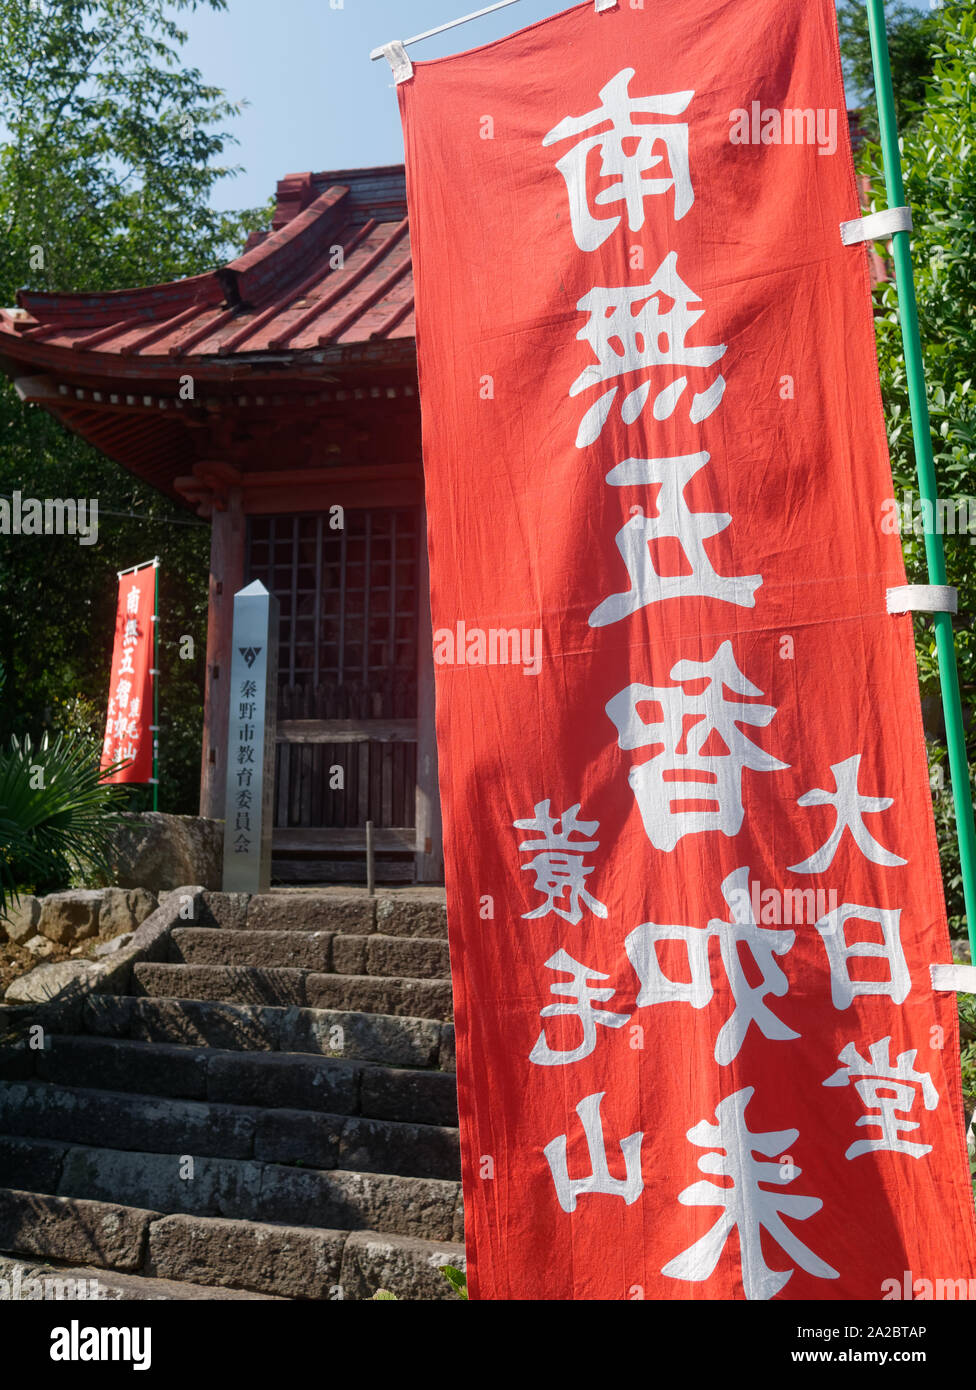 Close-up of a red flag at the entrance of the Minoge Dainichi Dou Buddhist temple in Mount Minoge, Minoge, Hadano city, Kanagawa prefecture, Japan. Stock Photo